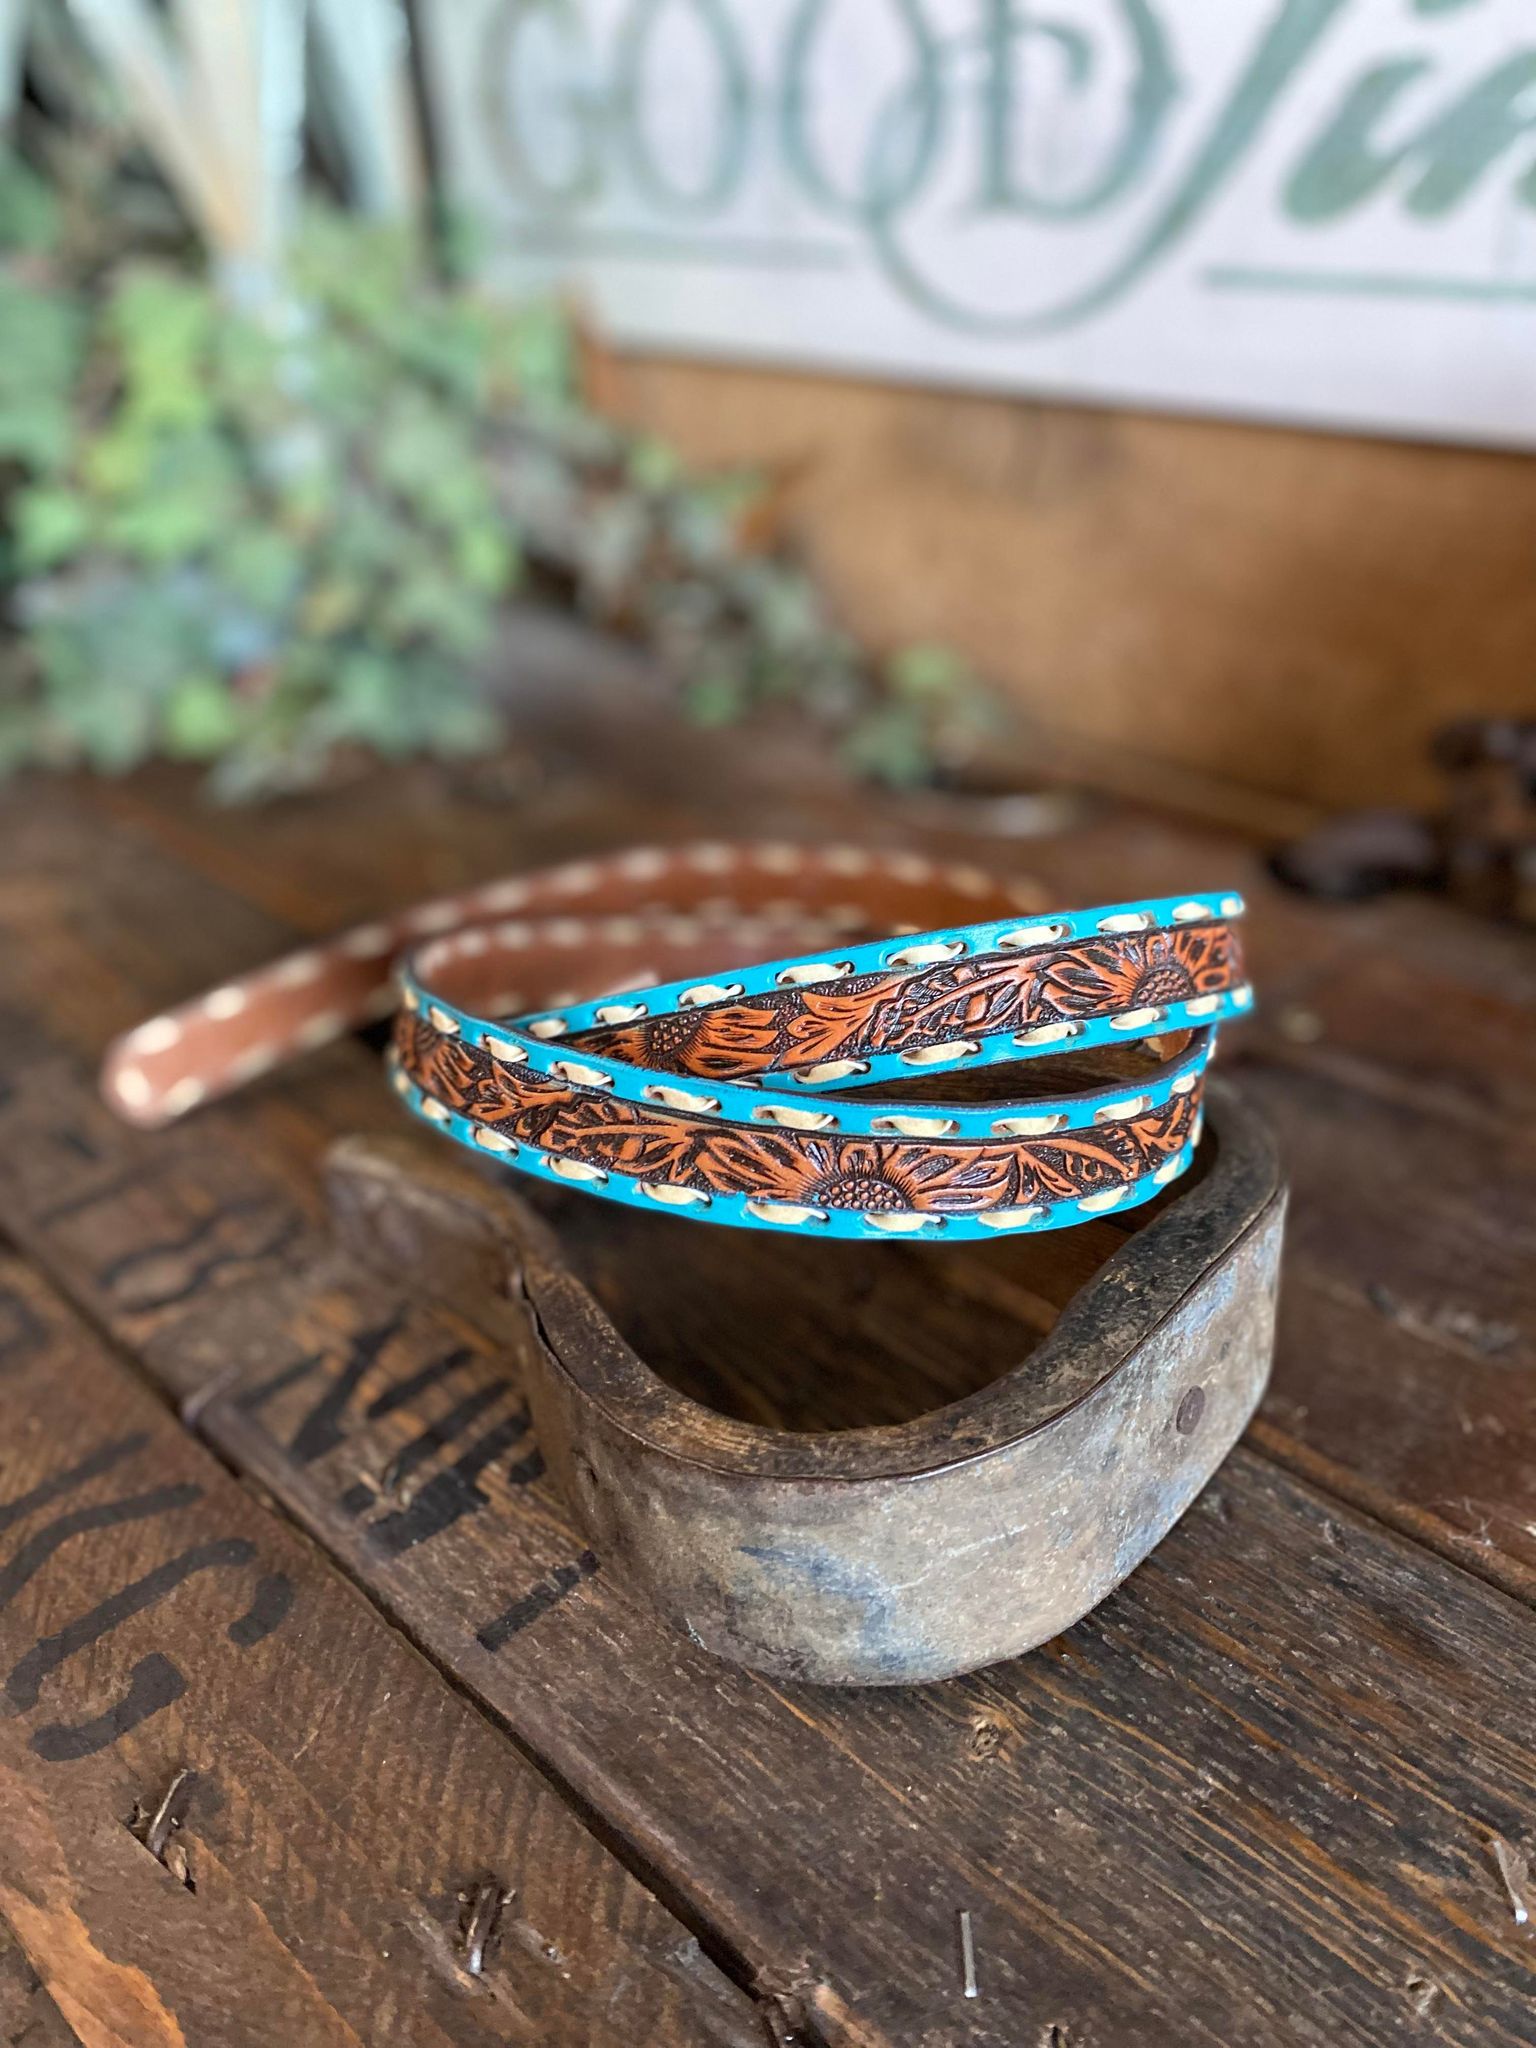 Ladies Natural Tooled Leather Belt w/ Turquoise and Cream Buck Stitch 1